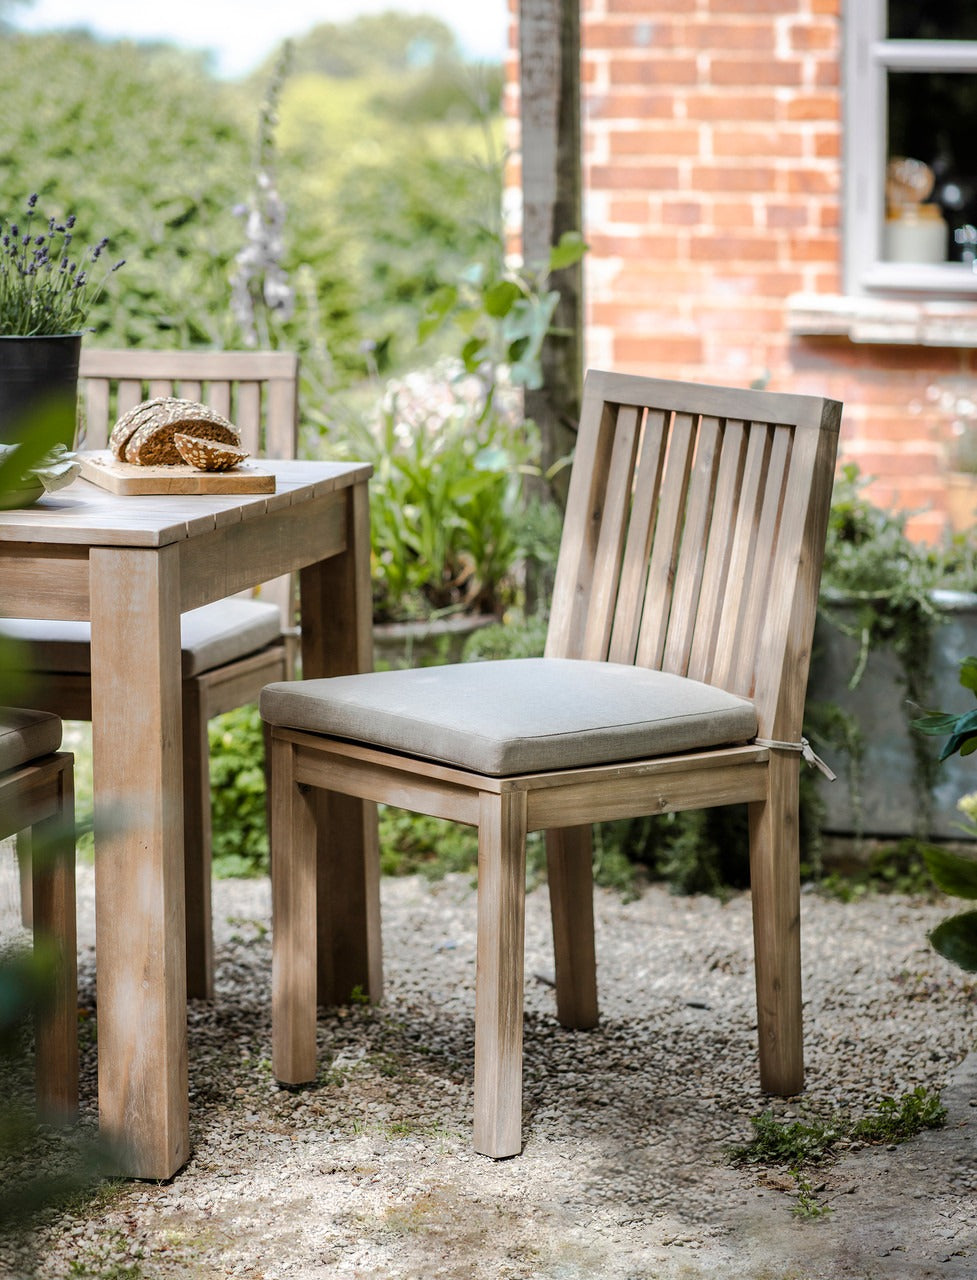 Garden Trading Porthallow Dining Chairs – Set of 2